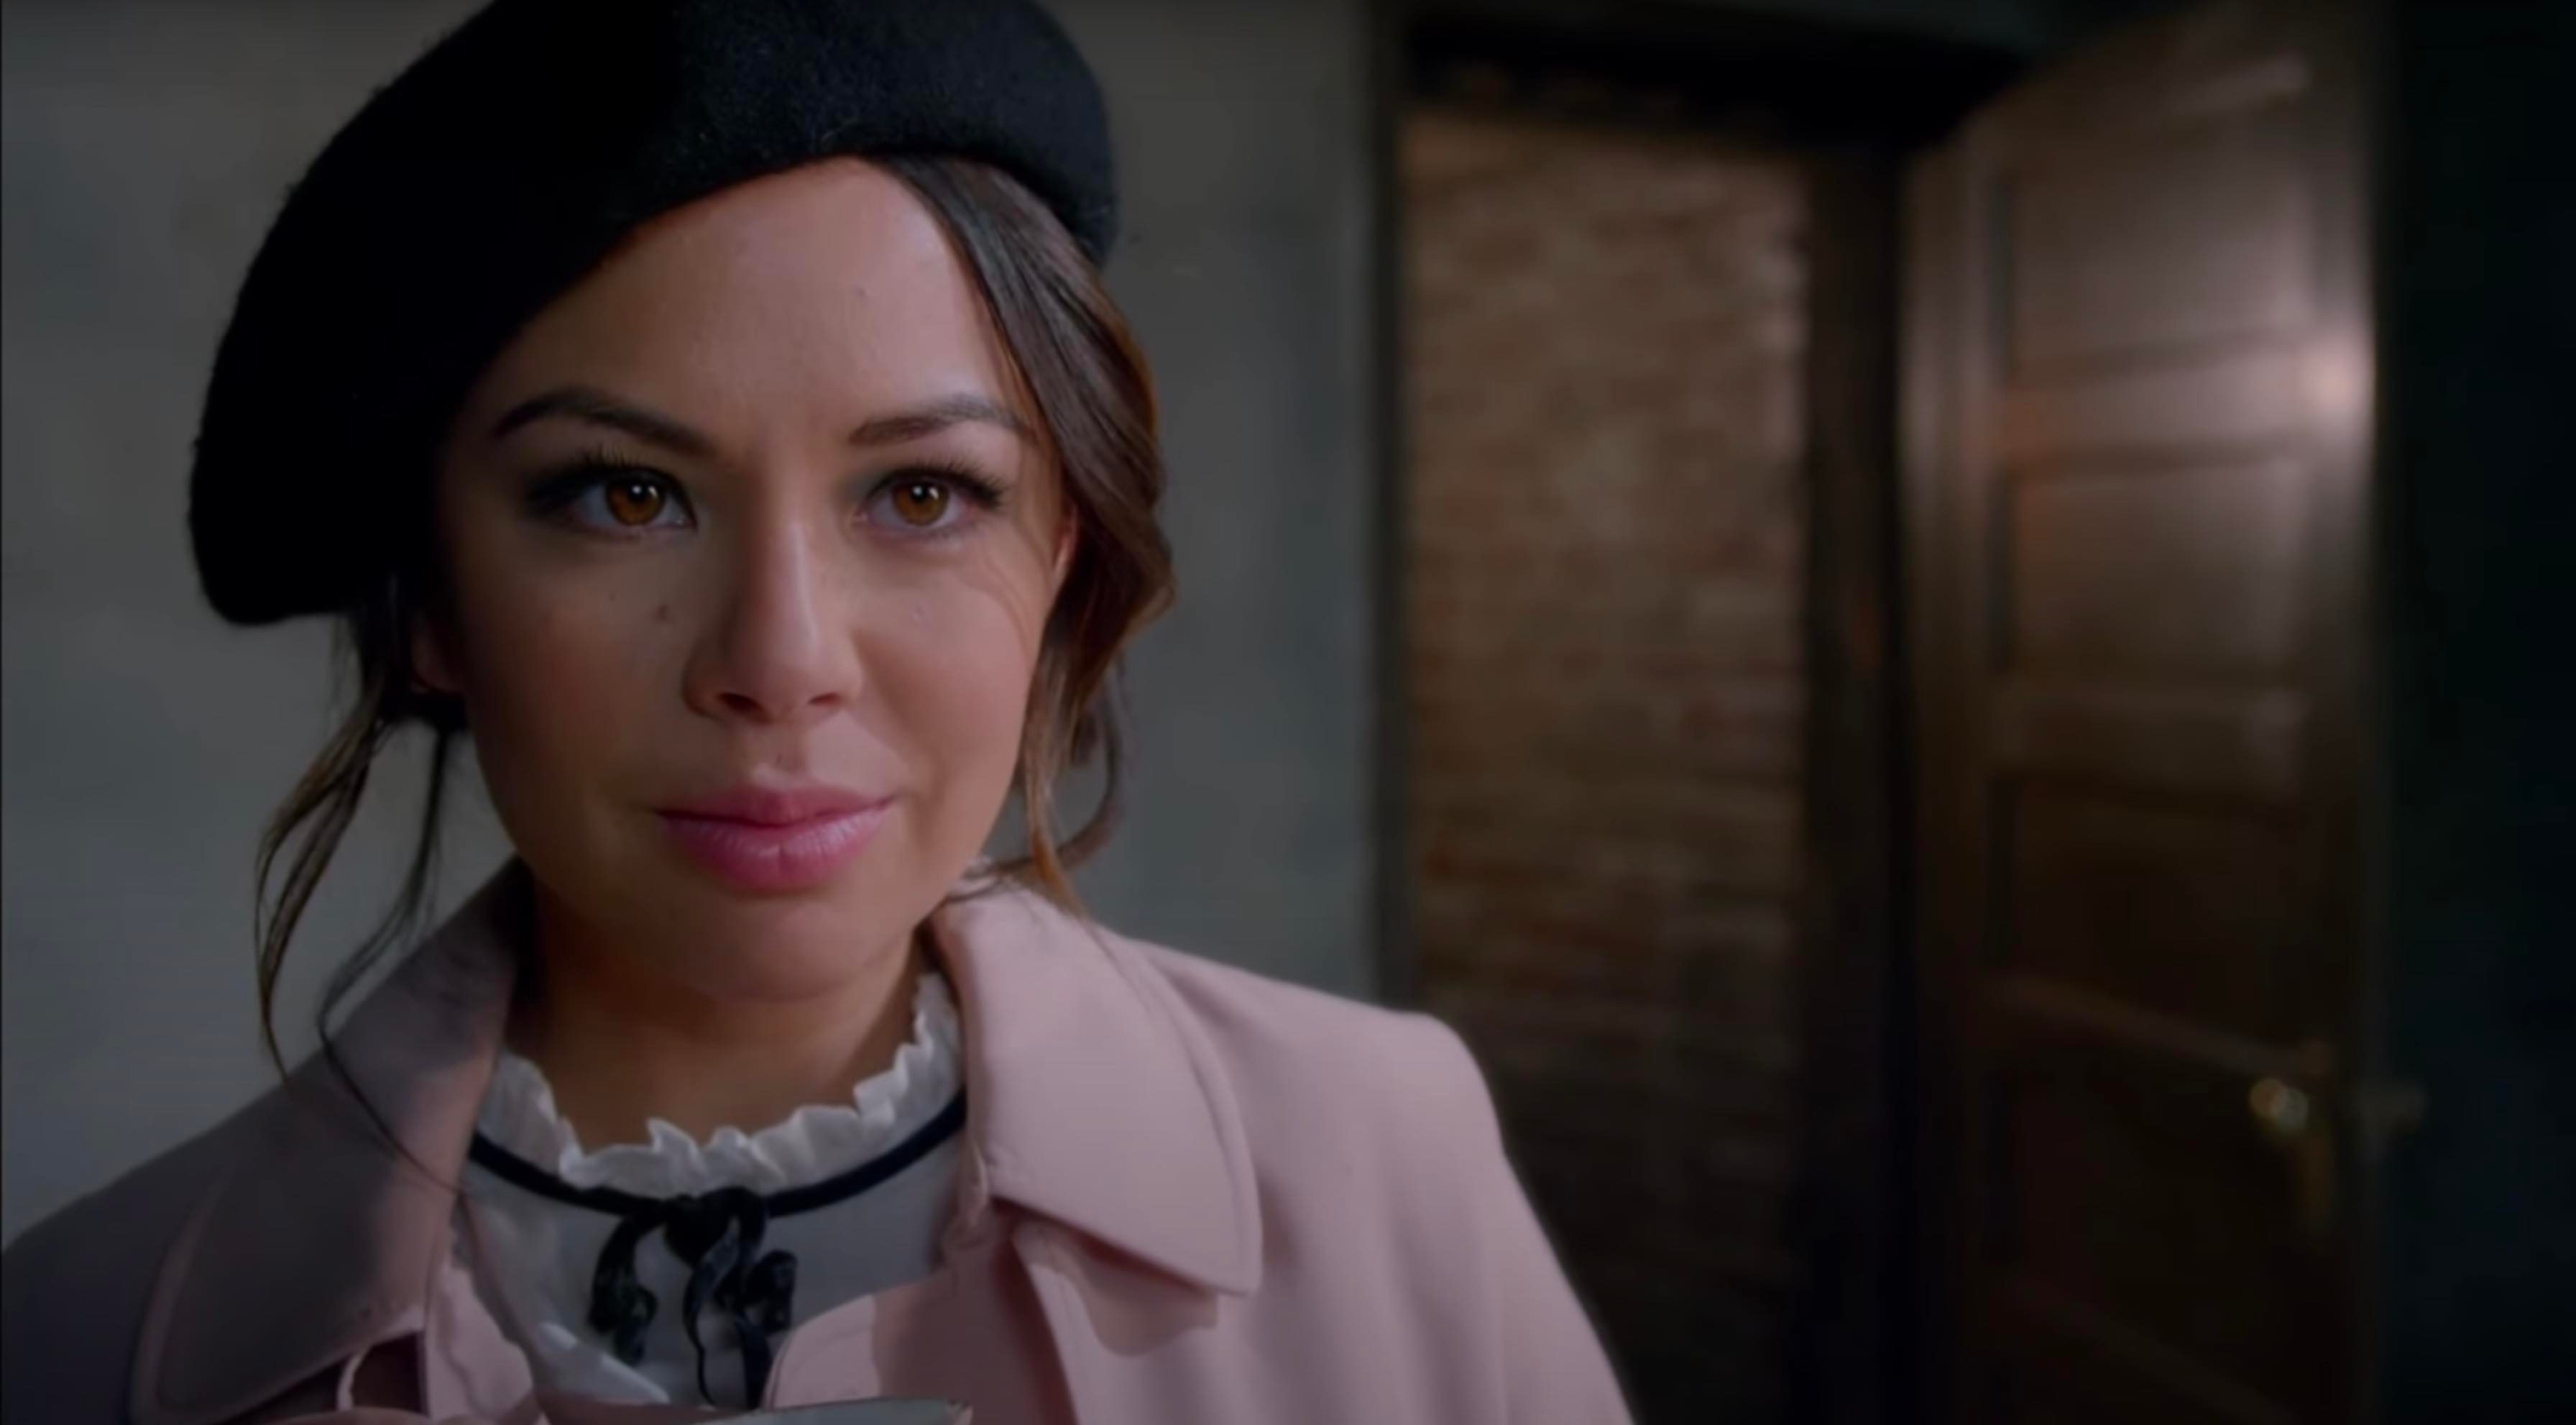 Janel Parrish To Star in New Hallmark Series 'Family History Mysteries